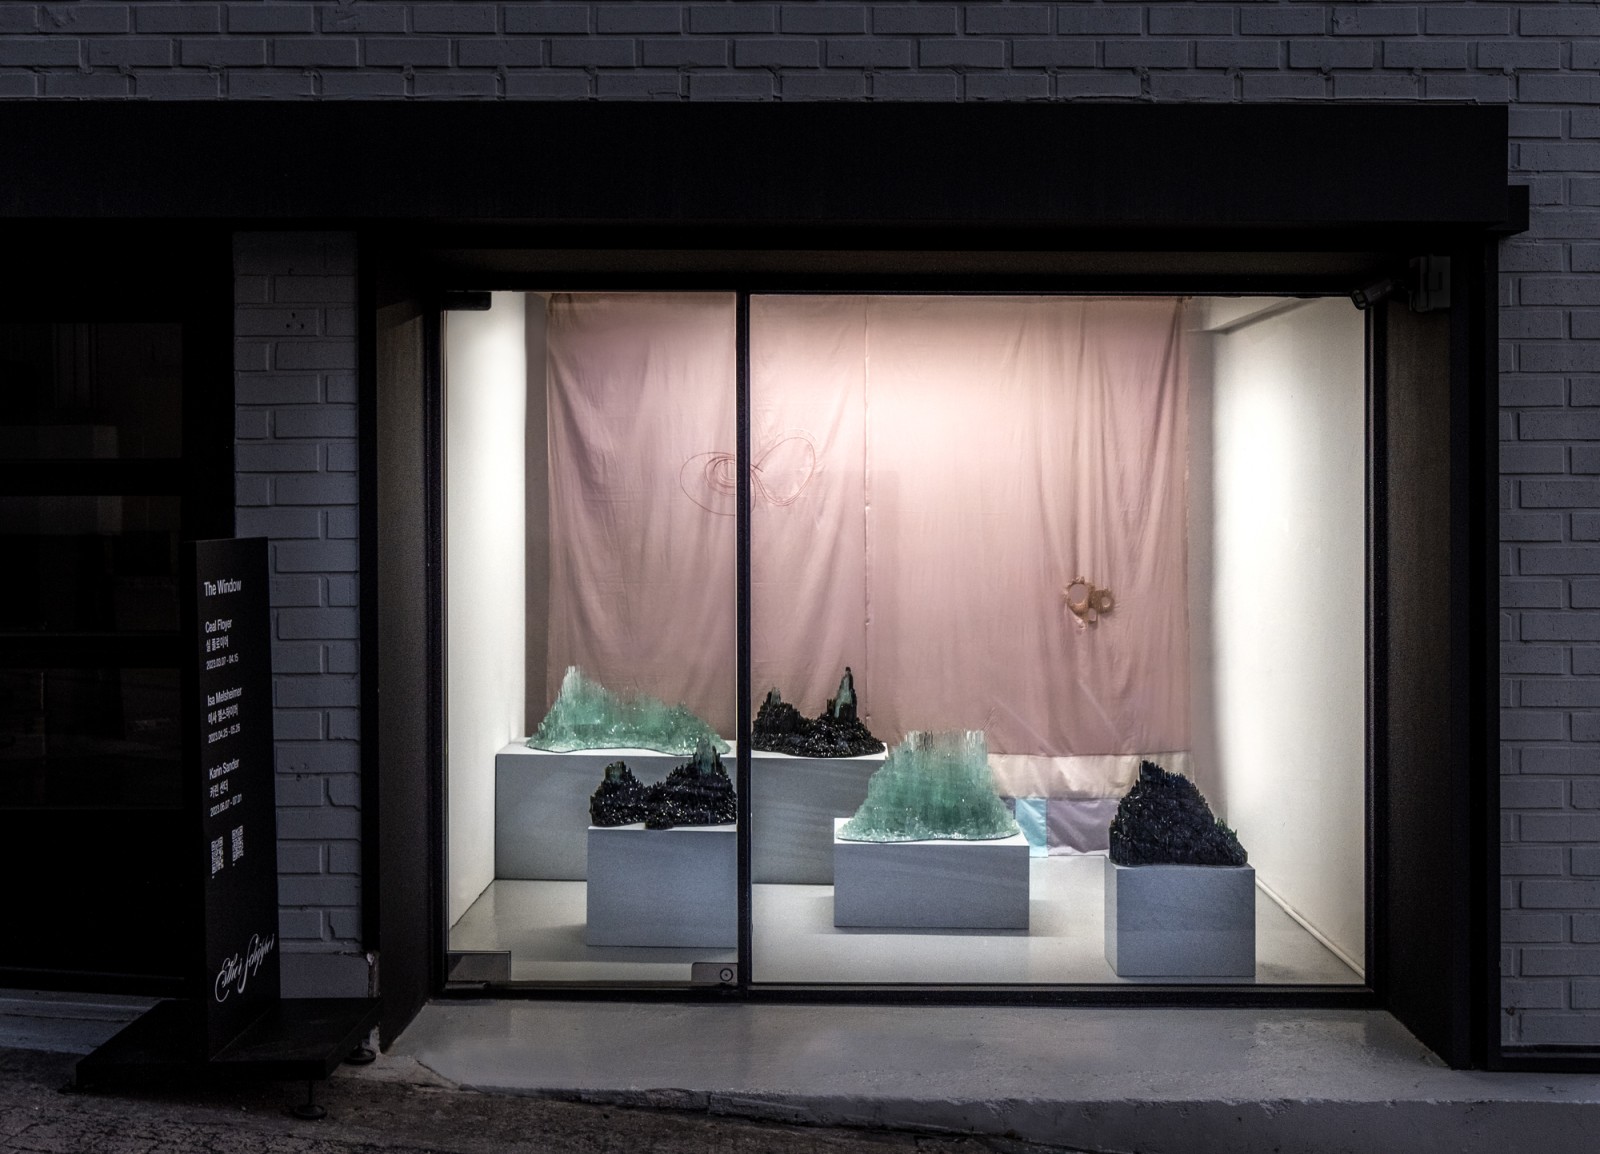 <div class="image_caption_container"><div class="image_caption"><p>Exhibition view: <strong>The Window. Isa Melsheimer</strong>, Esther Schipper, Seoul, 2023. Photo © Hyun Jun Lee </p></div></div>